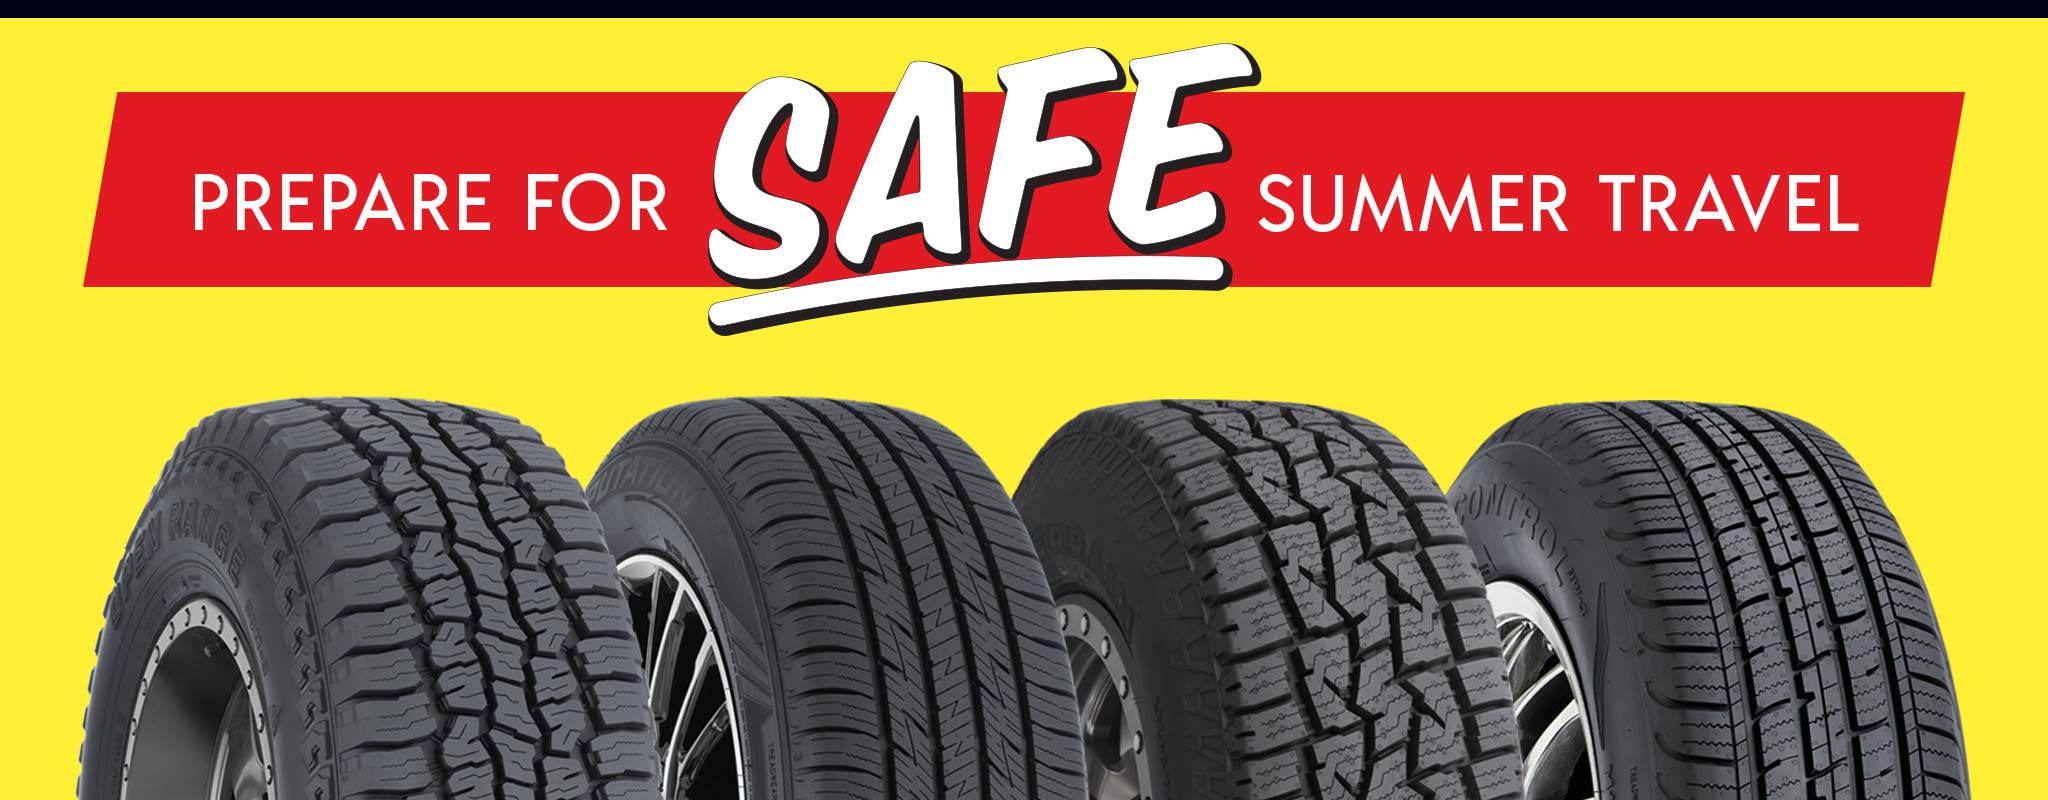 Two tires over a red and yellow background